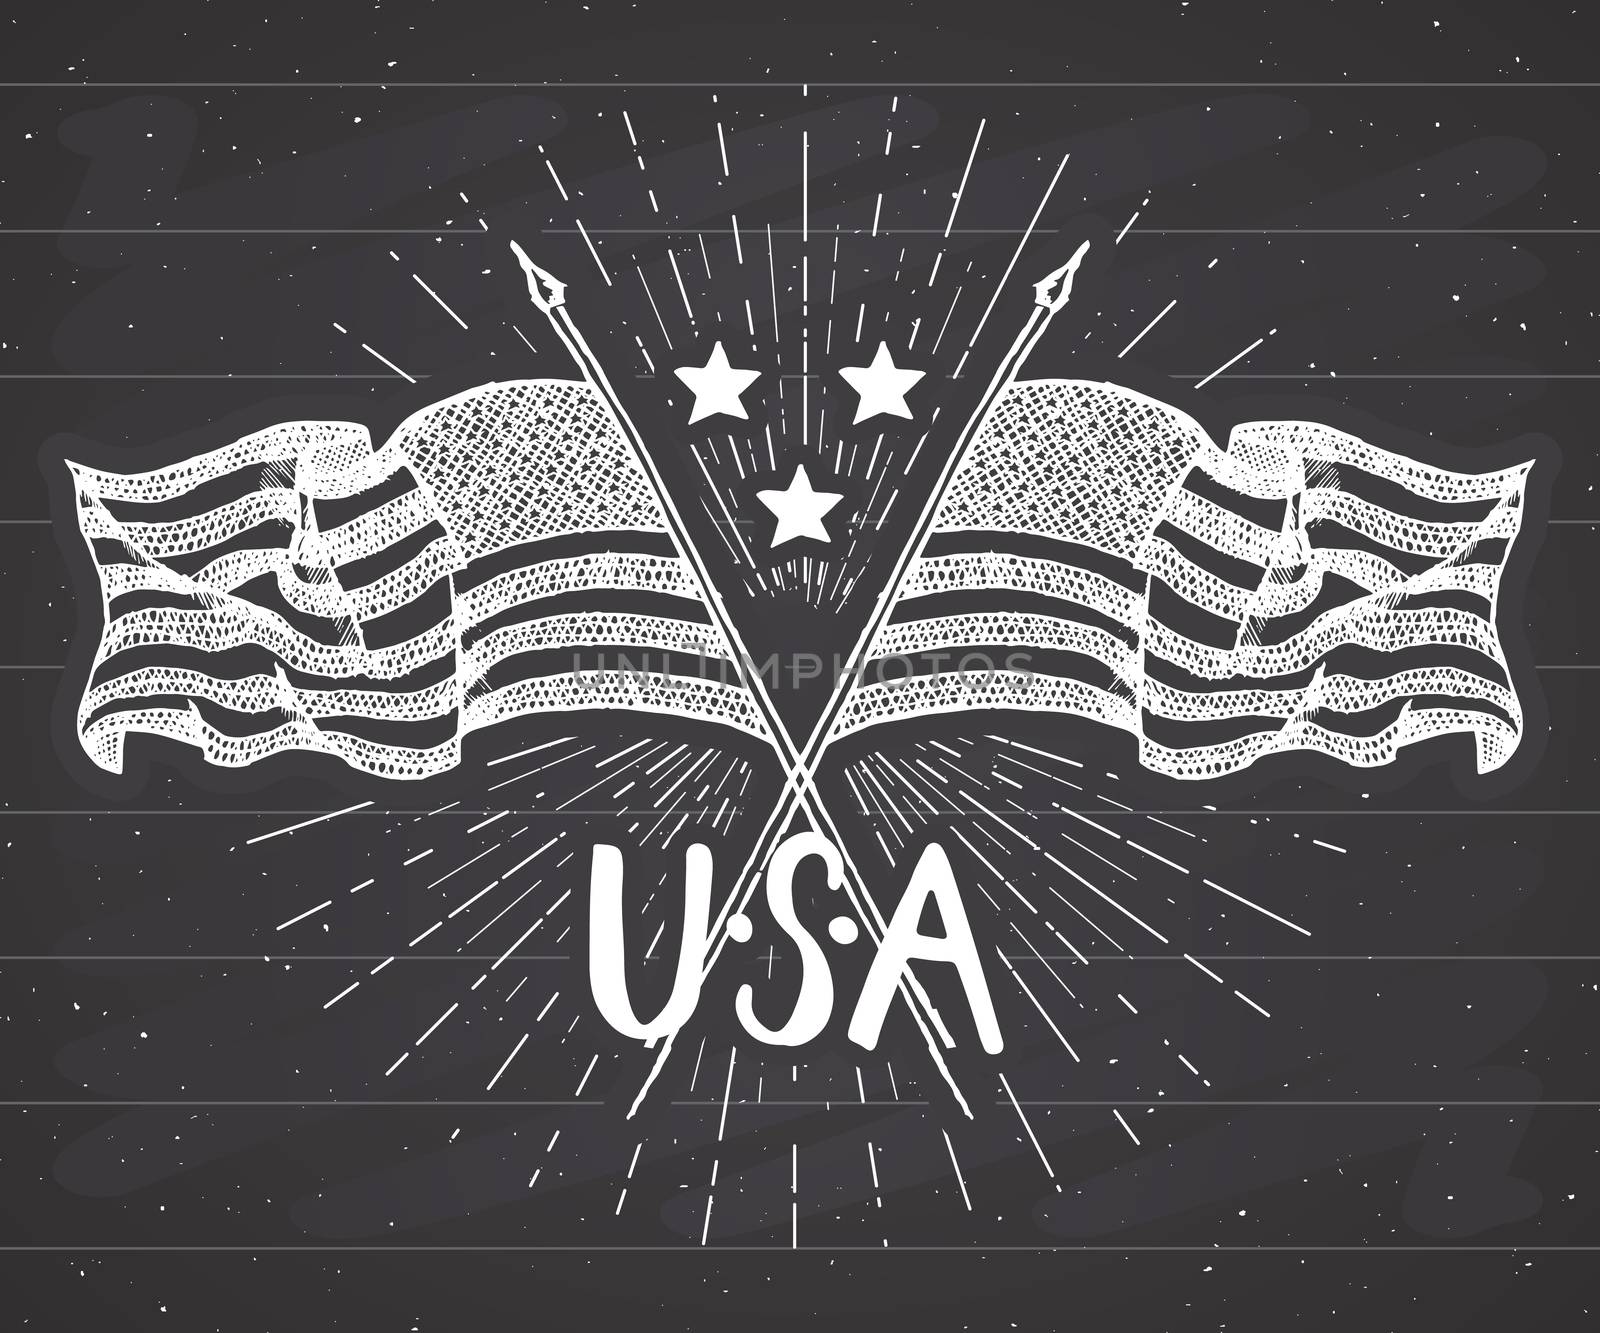 Vintage label, Hand drawn crossed USA flags, Happy Independence Day, fourth of july celebration, greeting card, grunge textured retro badge, typography design vector illustration on chalkboard. by Lemon_workshop